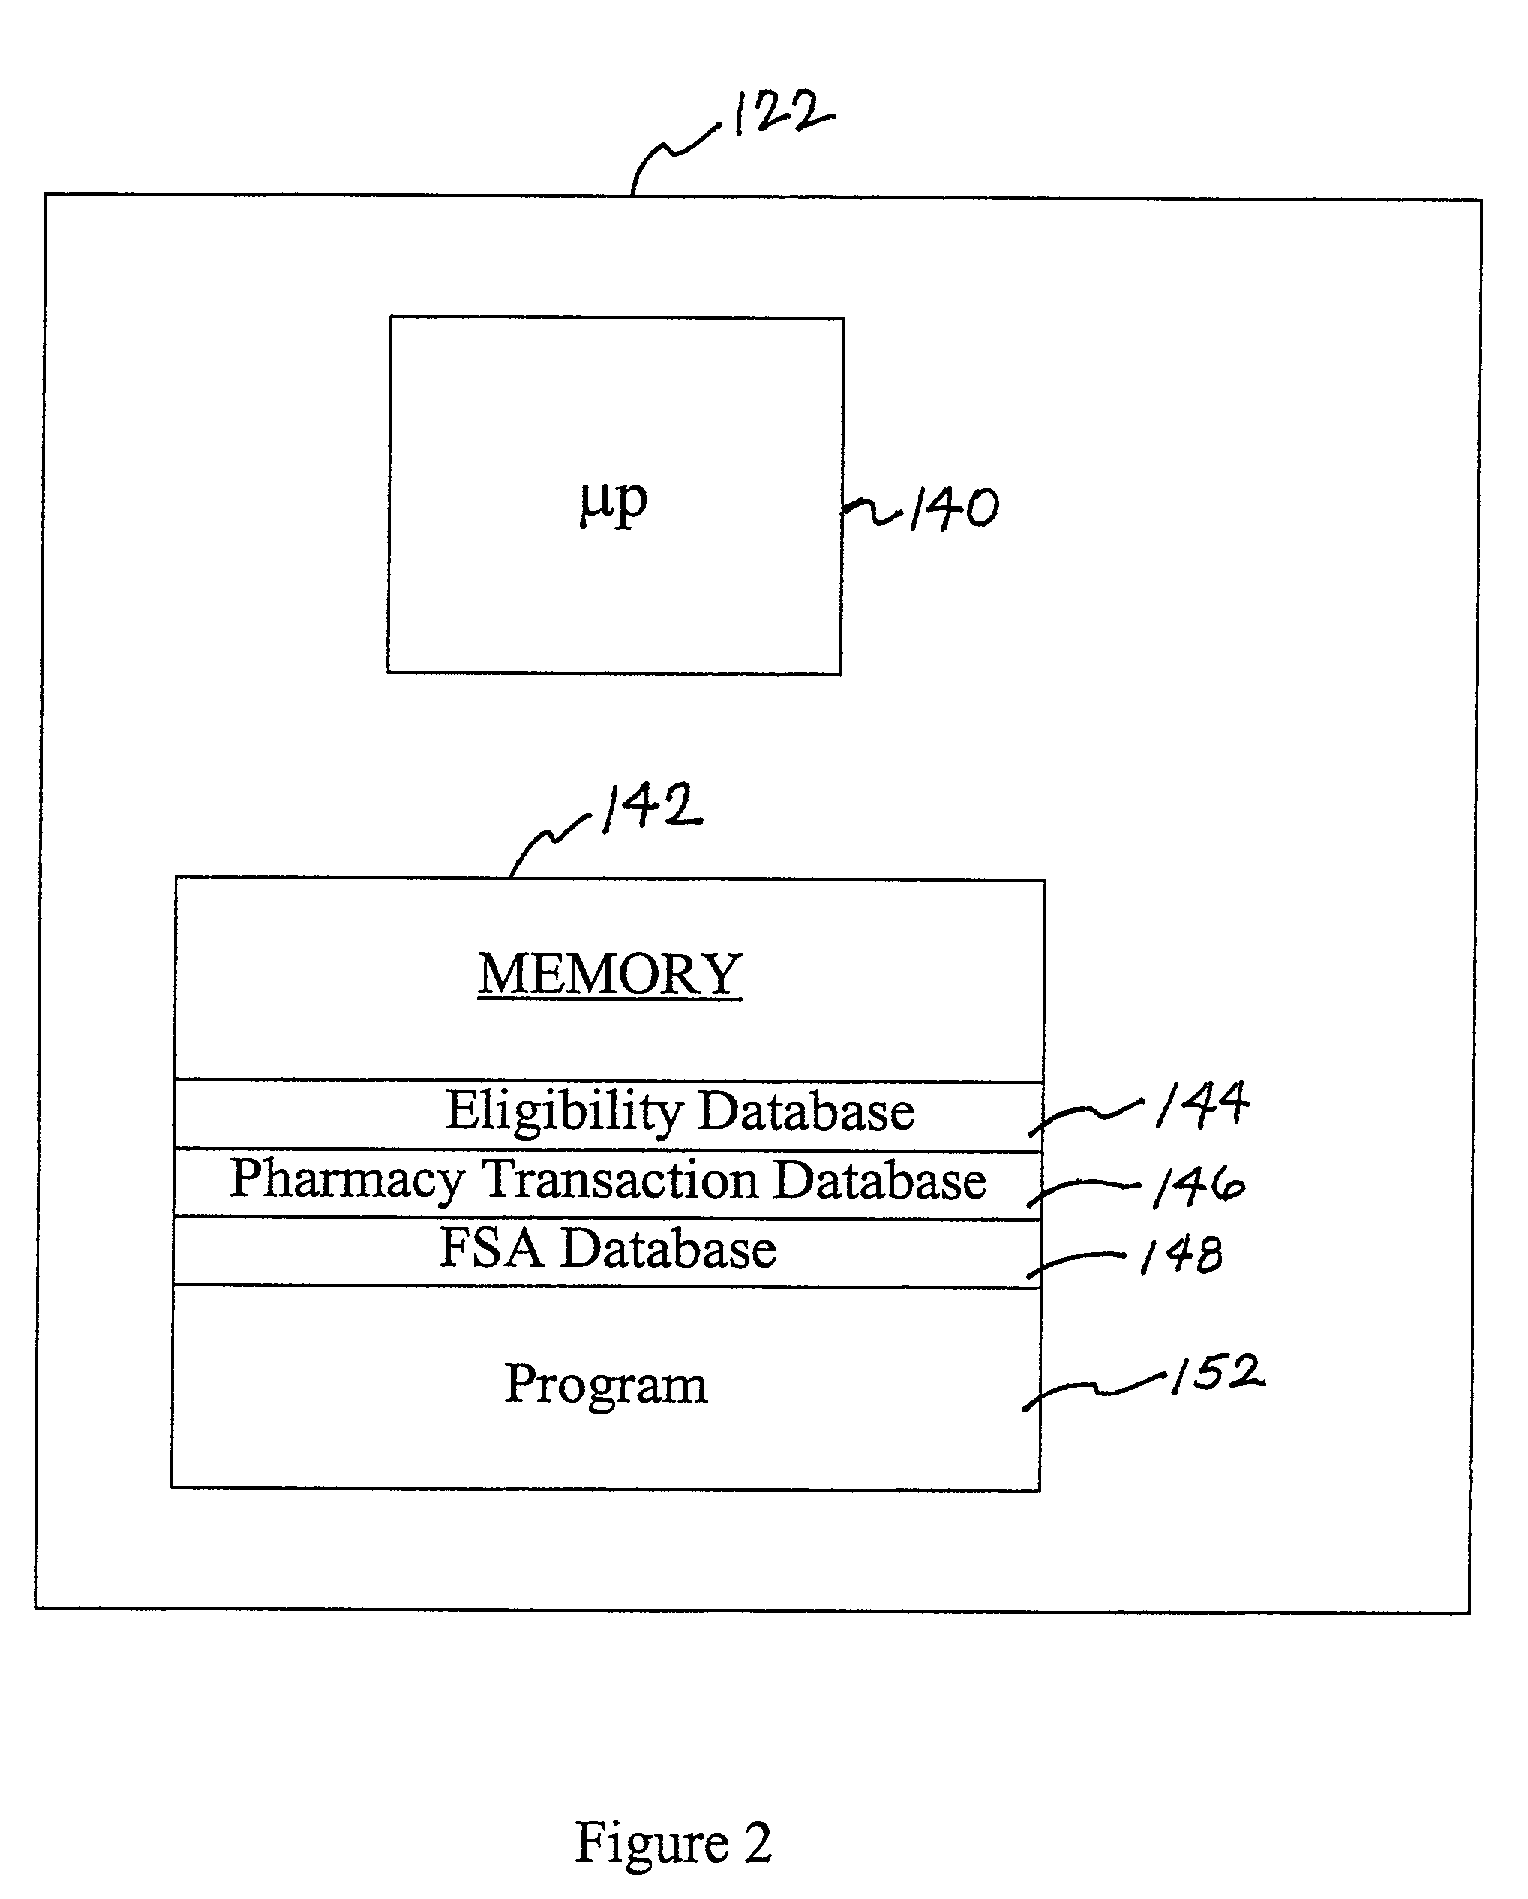 System and method for processing flexible spending account transactions